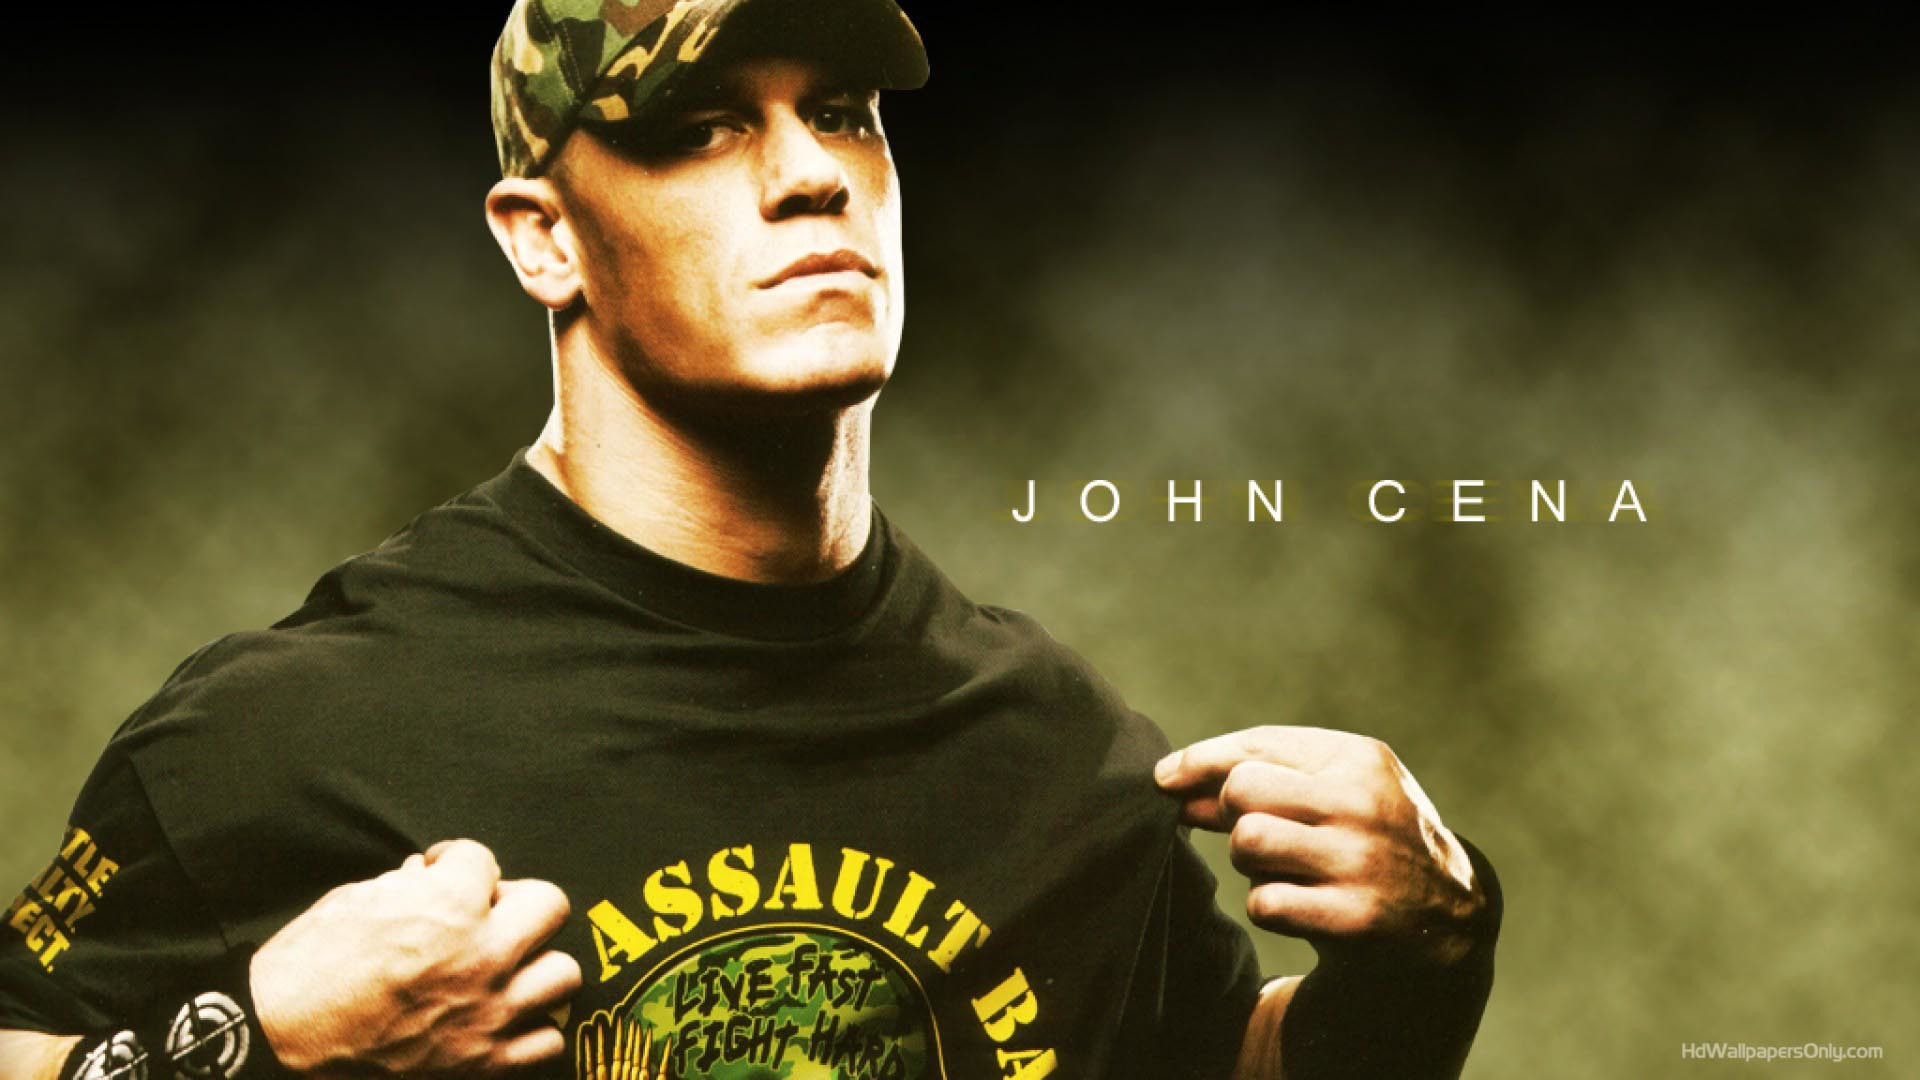 1920x1080 John Cena Wallpapers HD - HD Wallpapers OnlyHD Wallpapers Only